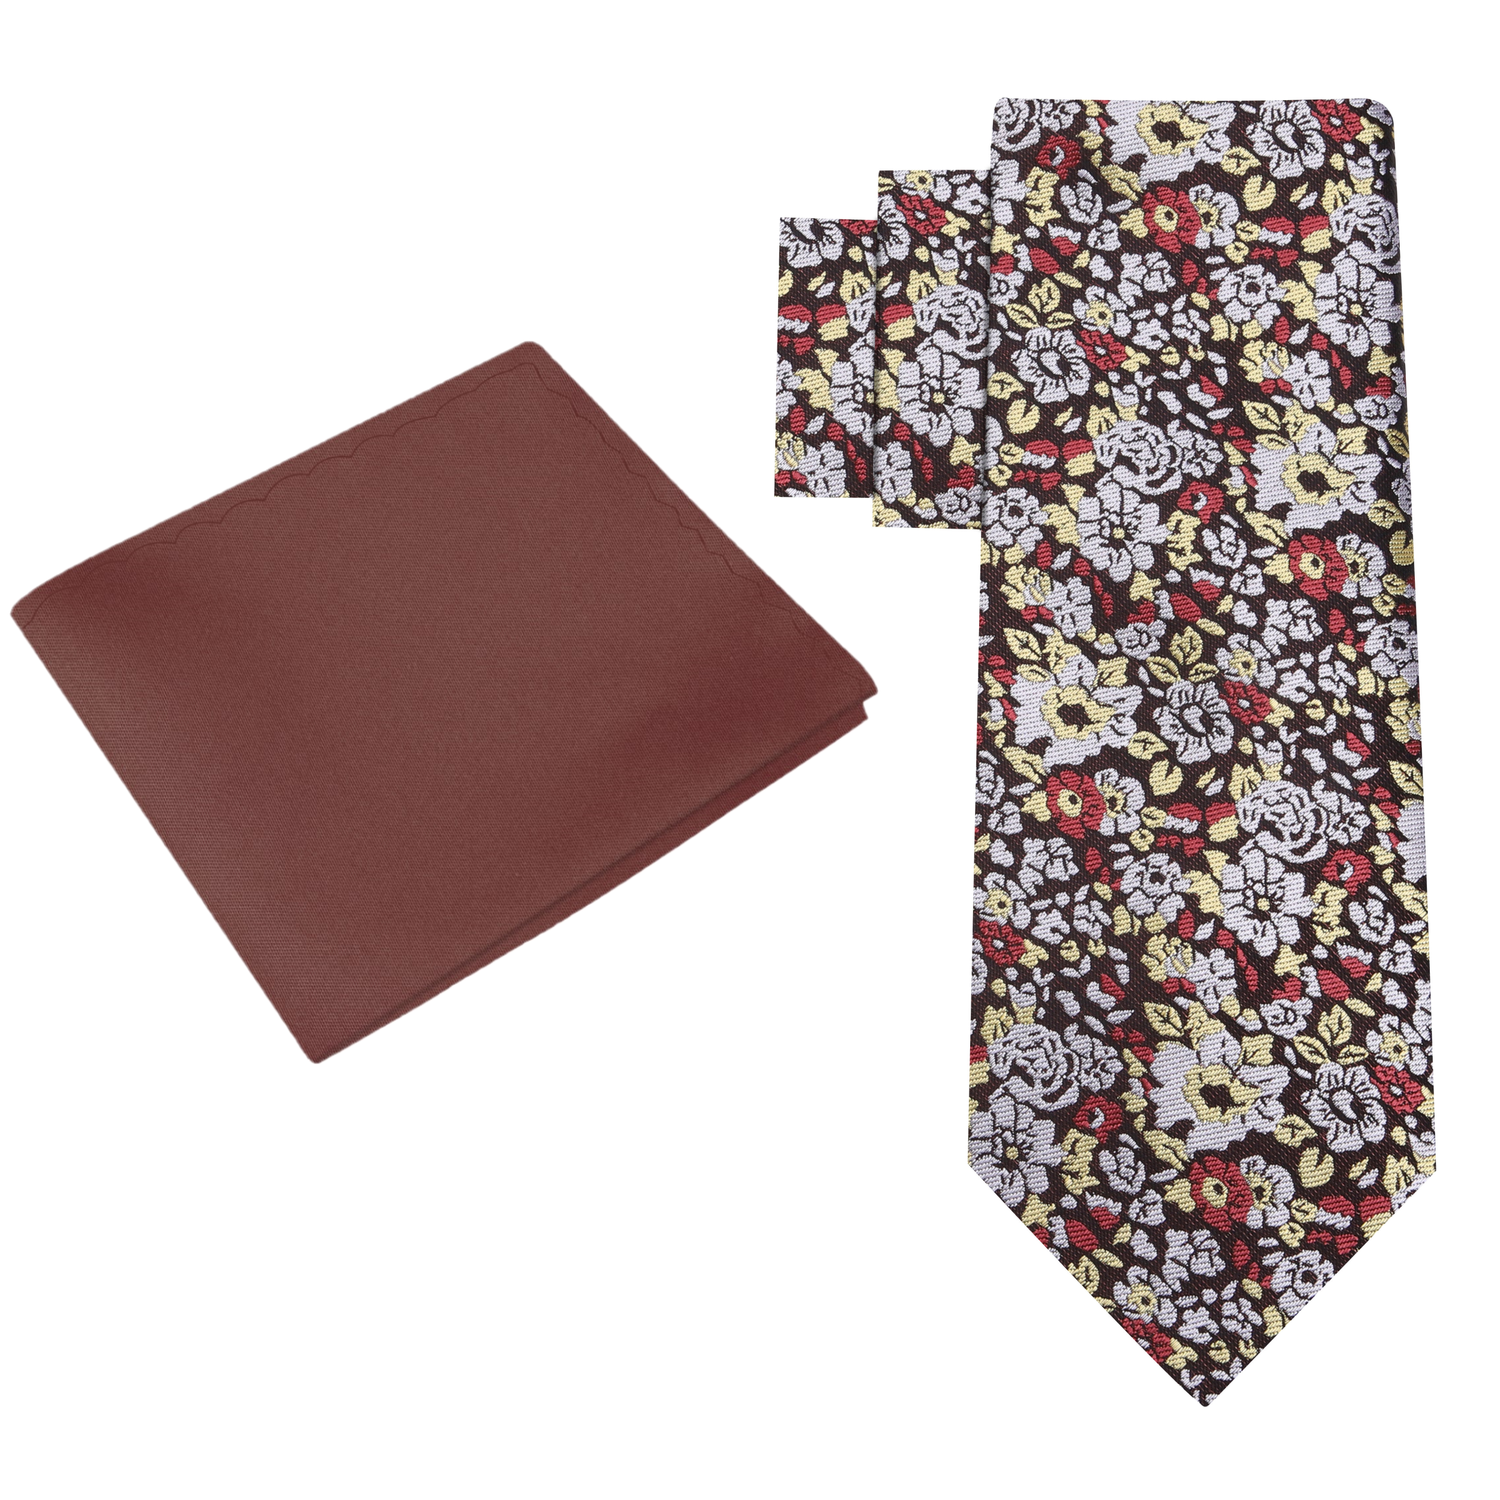 Alt View: Brown, Grey, Light Gold Small Flowers Necktie and Brown Square